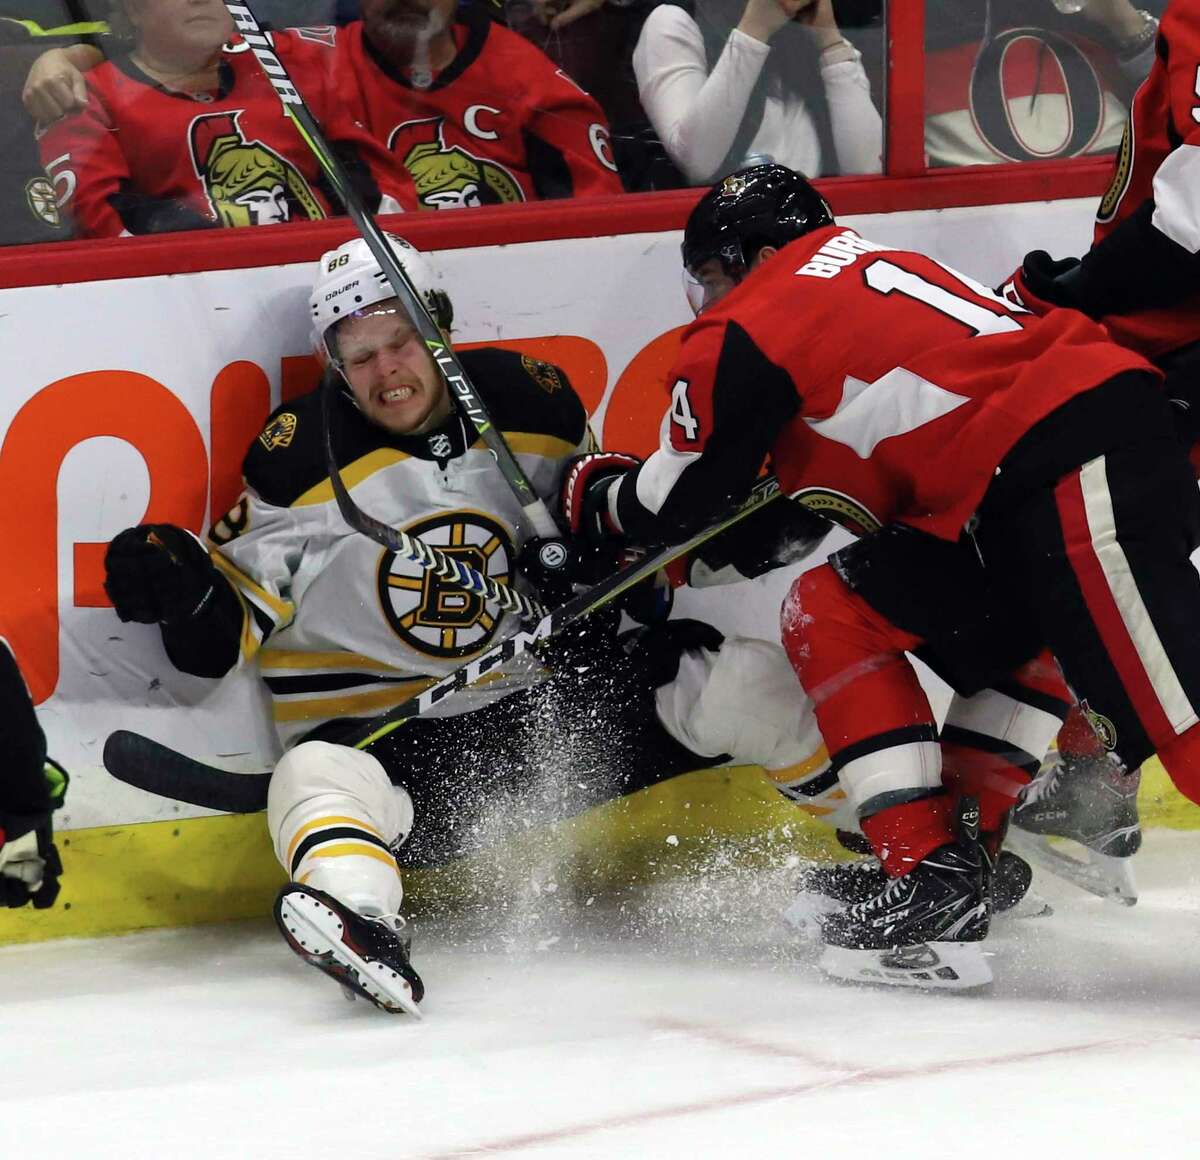 Boston Bruins' David Pastrnak (88) reacts after being checked by Ottawa Senators' Alexandre Burrows (14) during the third period of an NHL hockey game Saturday, Dec. 30, 2017, in Ottawa, Ontario. (Fred Chartrand/The Canadian Press via AP)